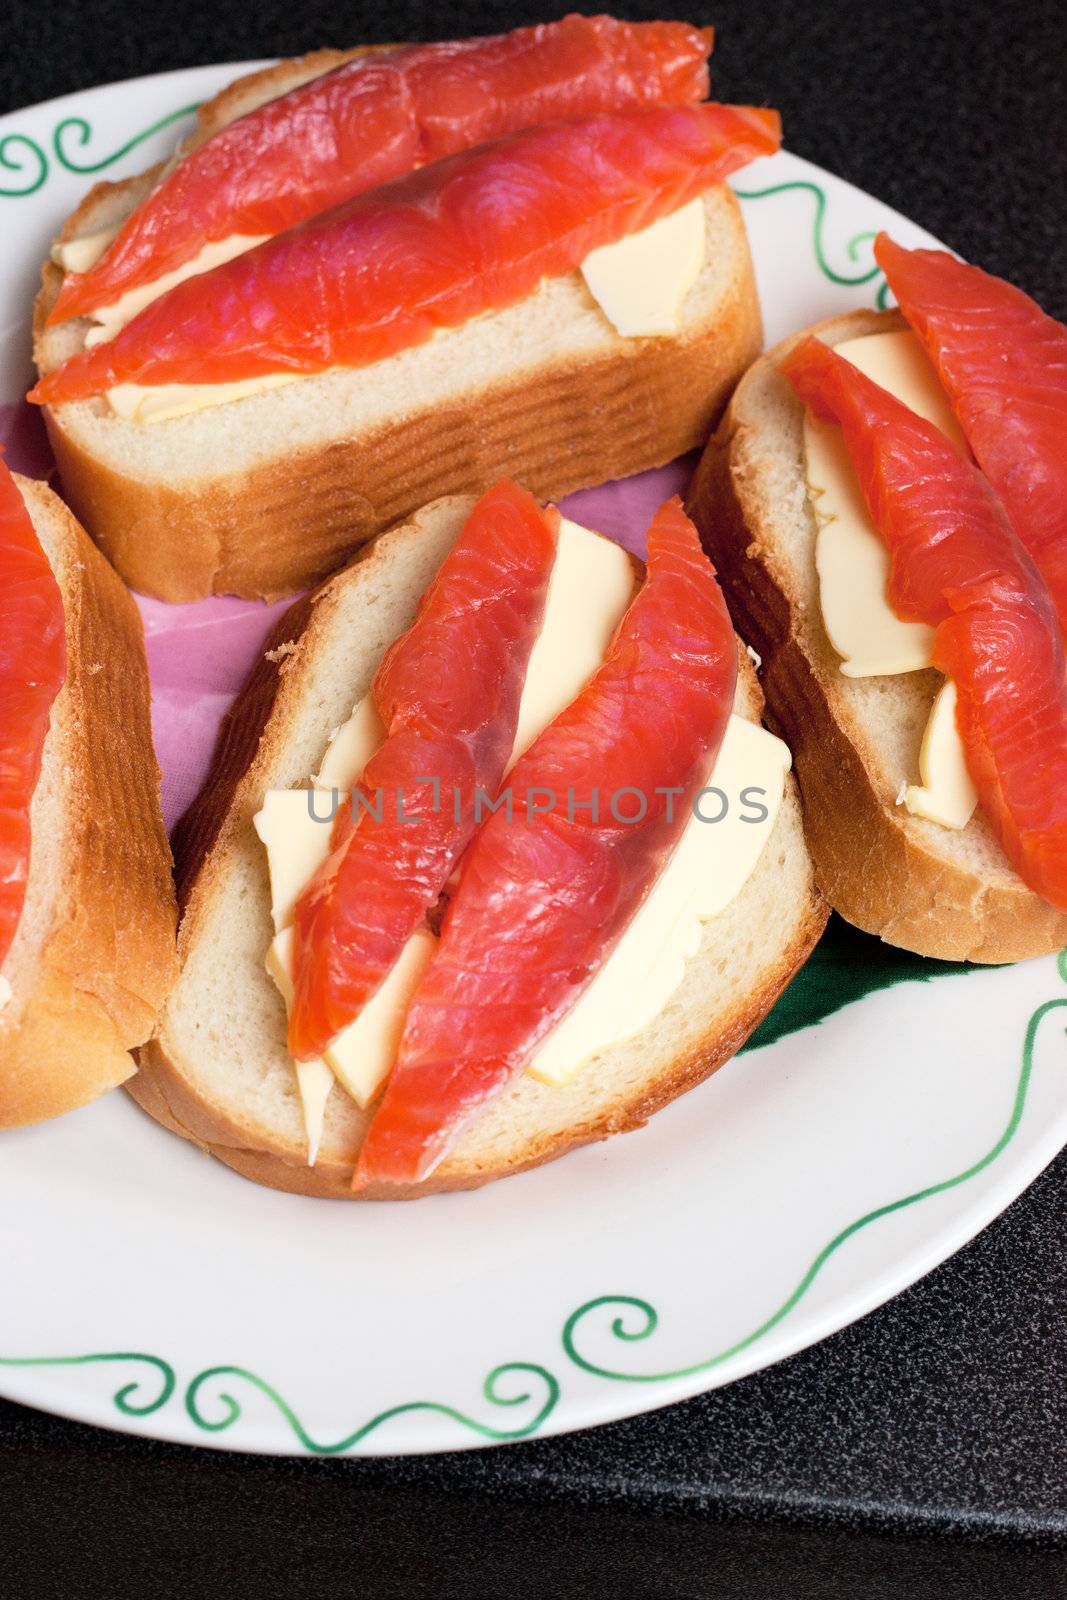 Fresh wild salmon fish fillet steaks on a bread and butter